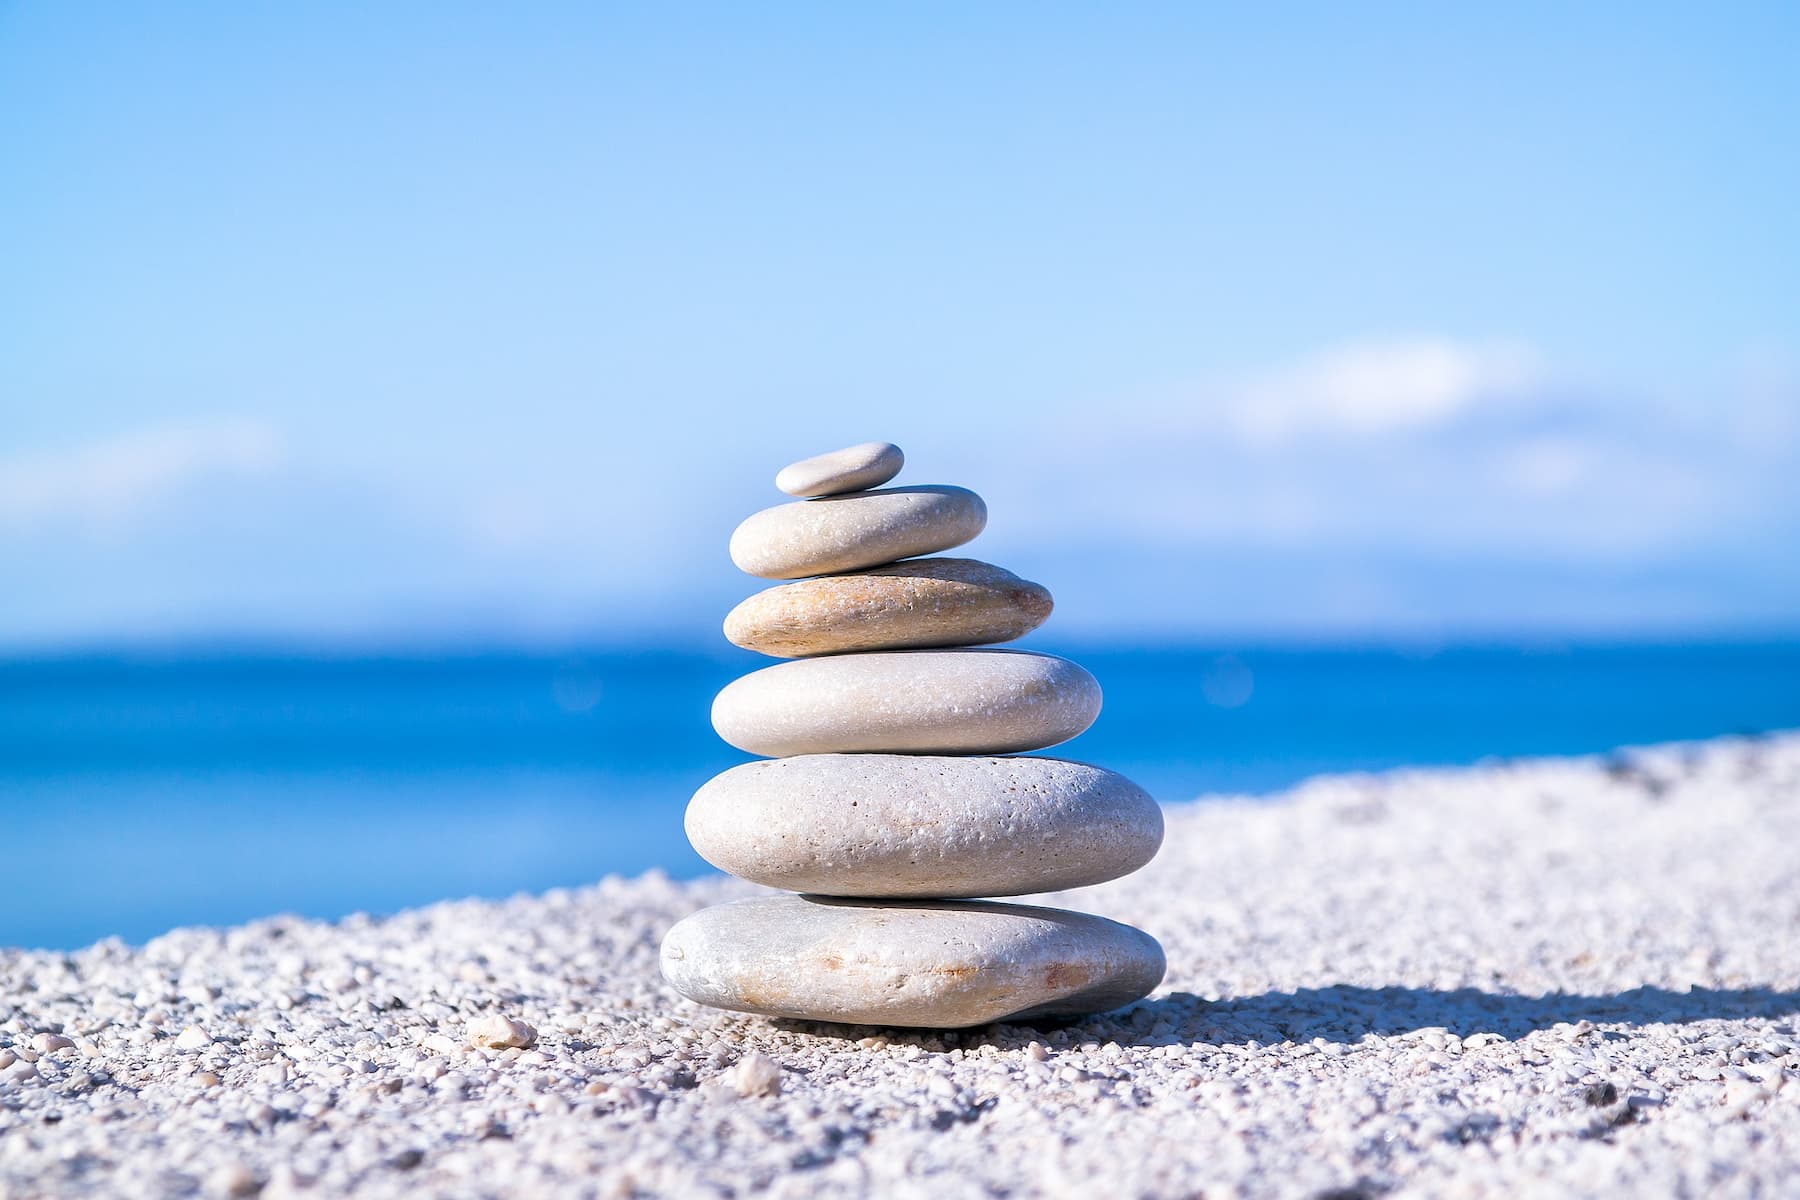 Rocks balanced on top of each other on a beach with a blue sky behind them